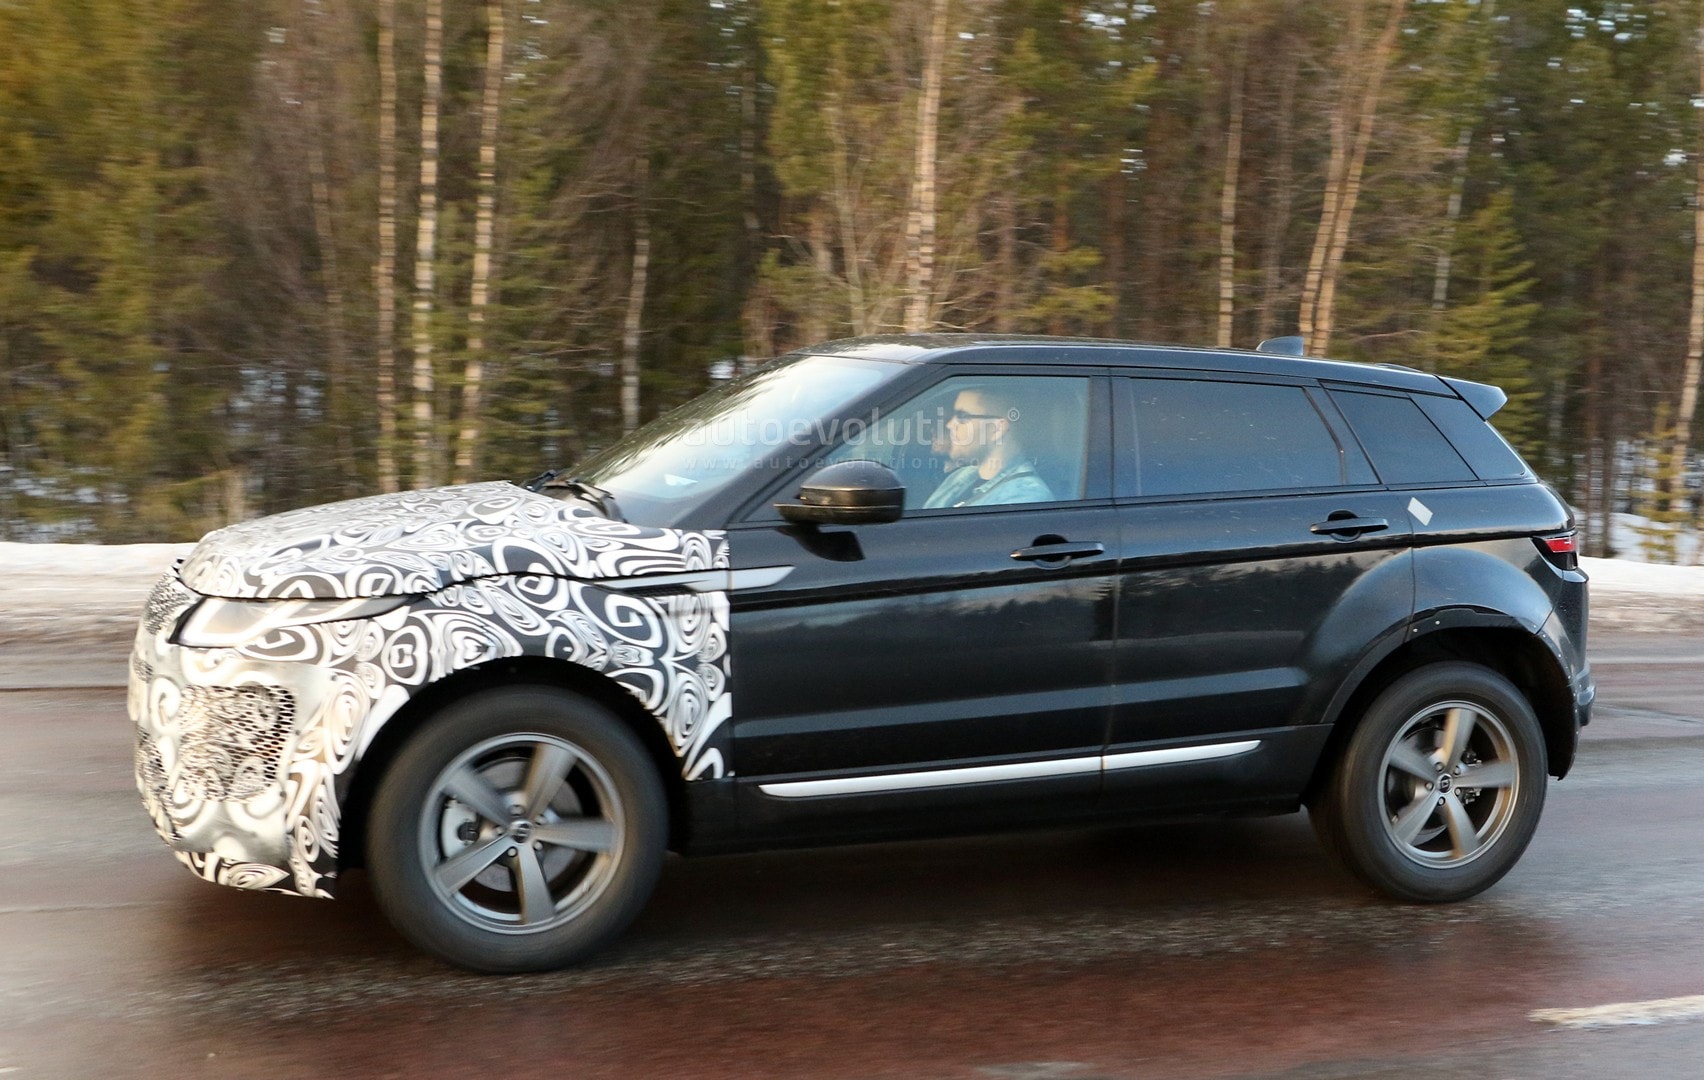 All-New Range Rover Evoque II Spied for the First Time as Test